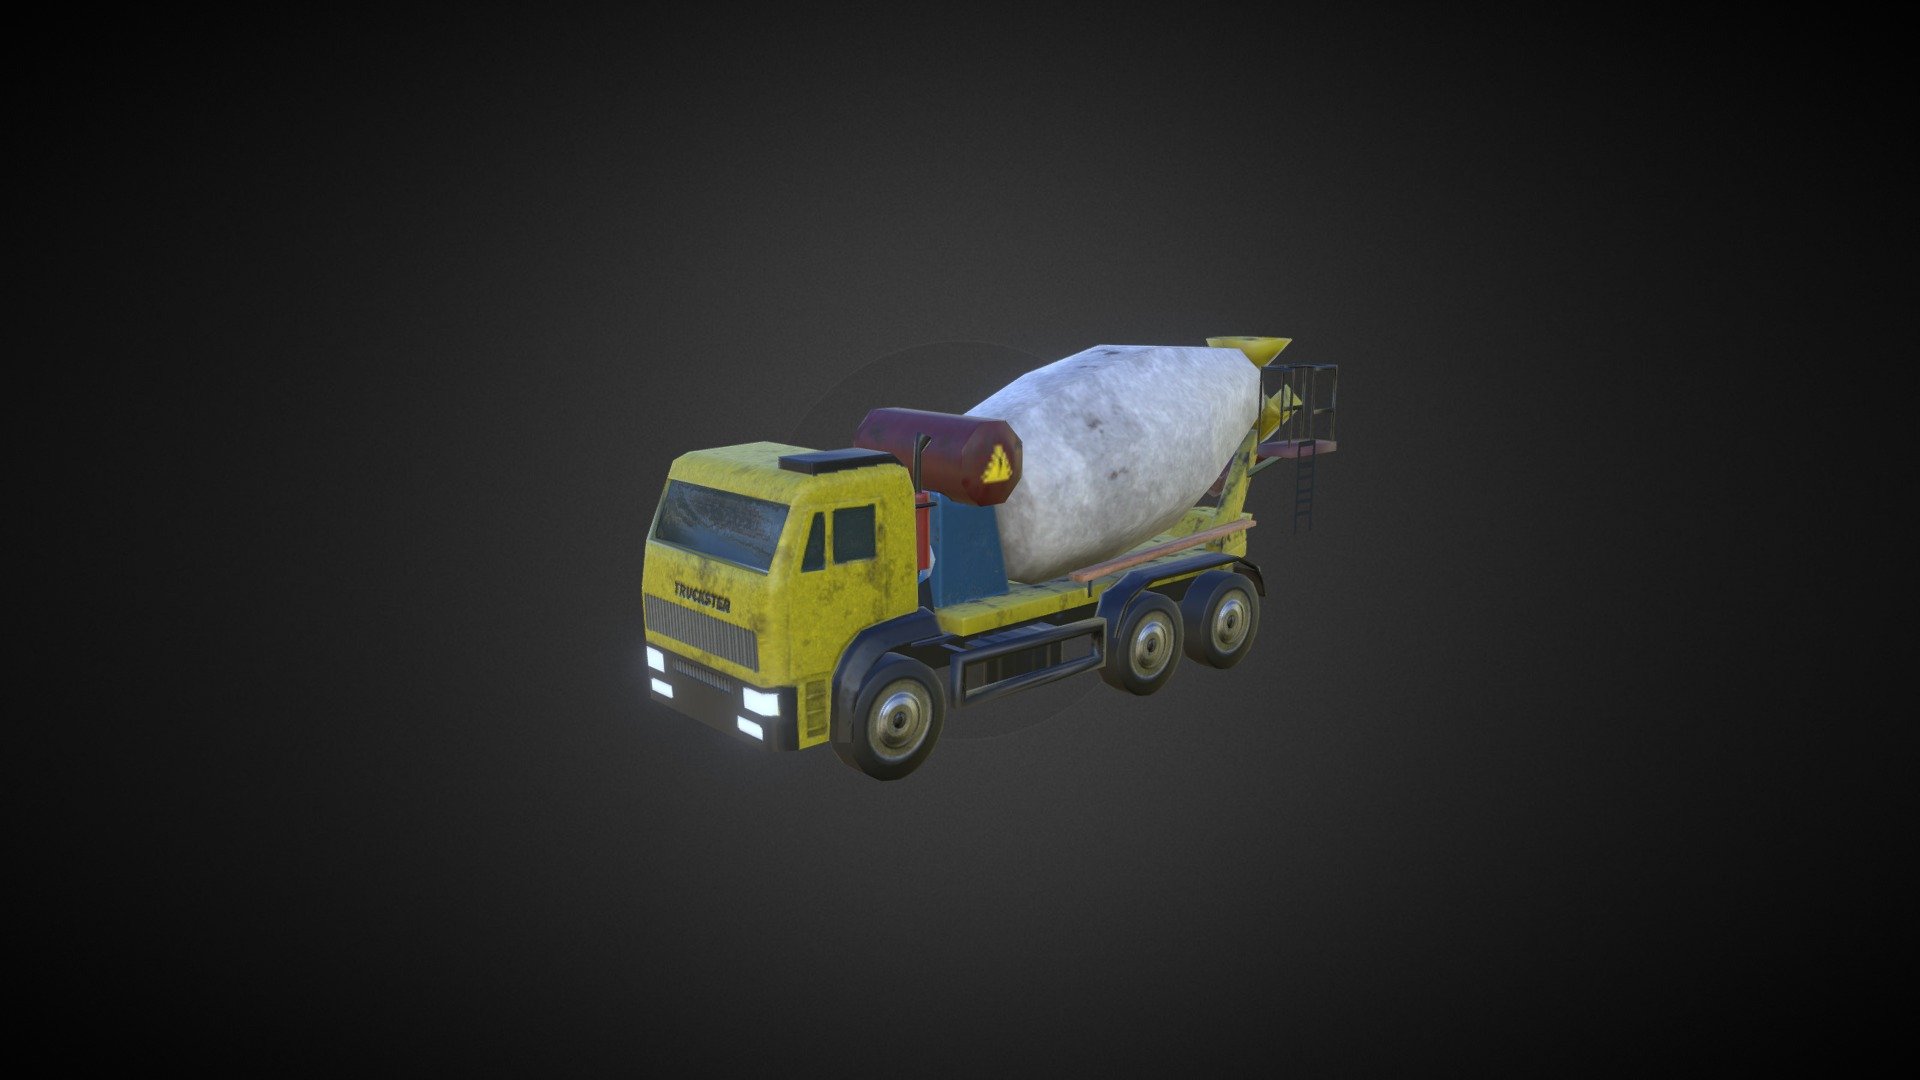 Low-poly concrete mixer truck for the Cities:Skylines game (http://steamcommunity.com/sharedfiles/filedetails/?id=545674922) - Concrete Mixer [Cities: Skylines] - 3D model by Shapernode 3d model